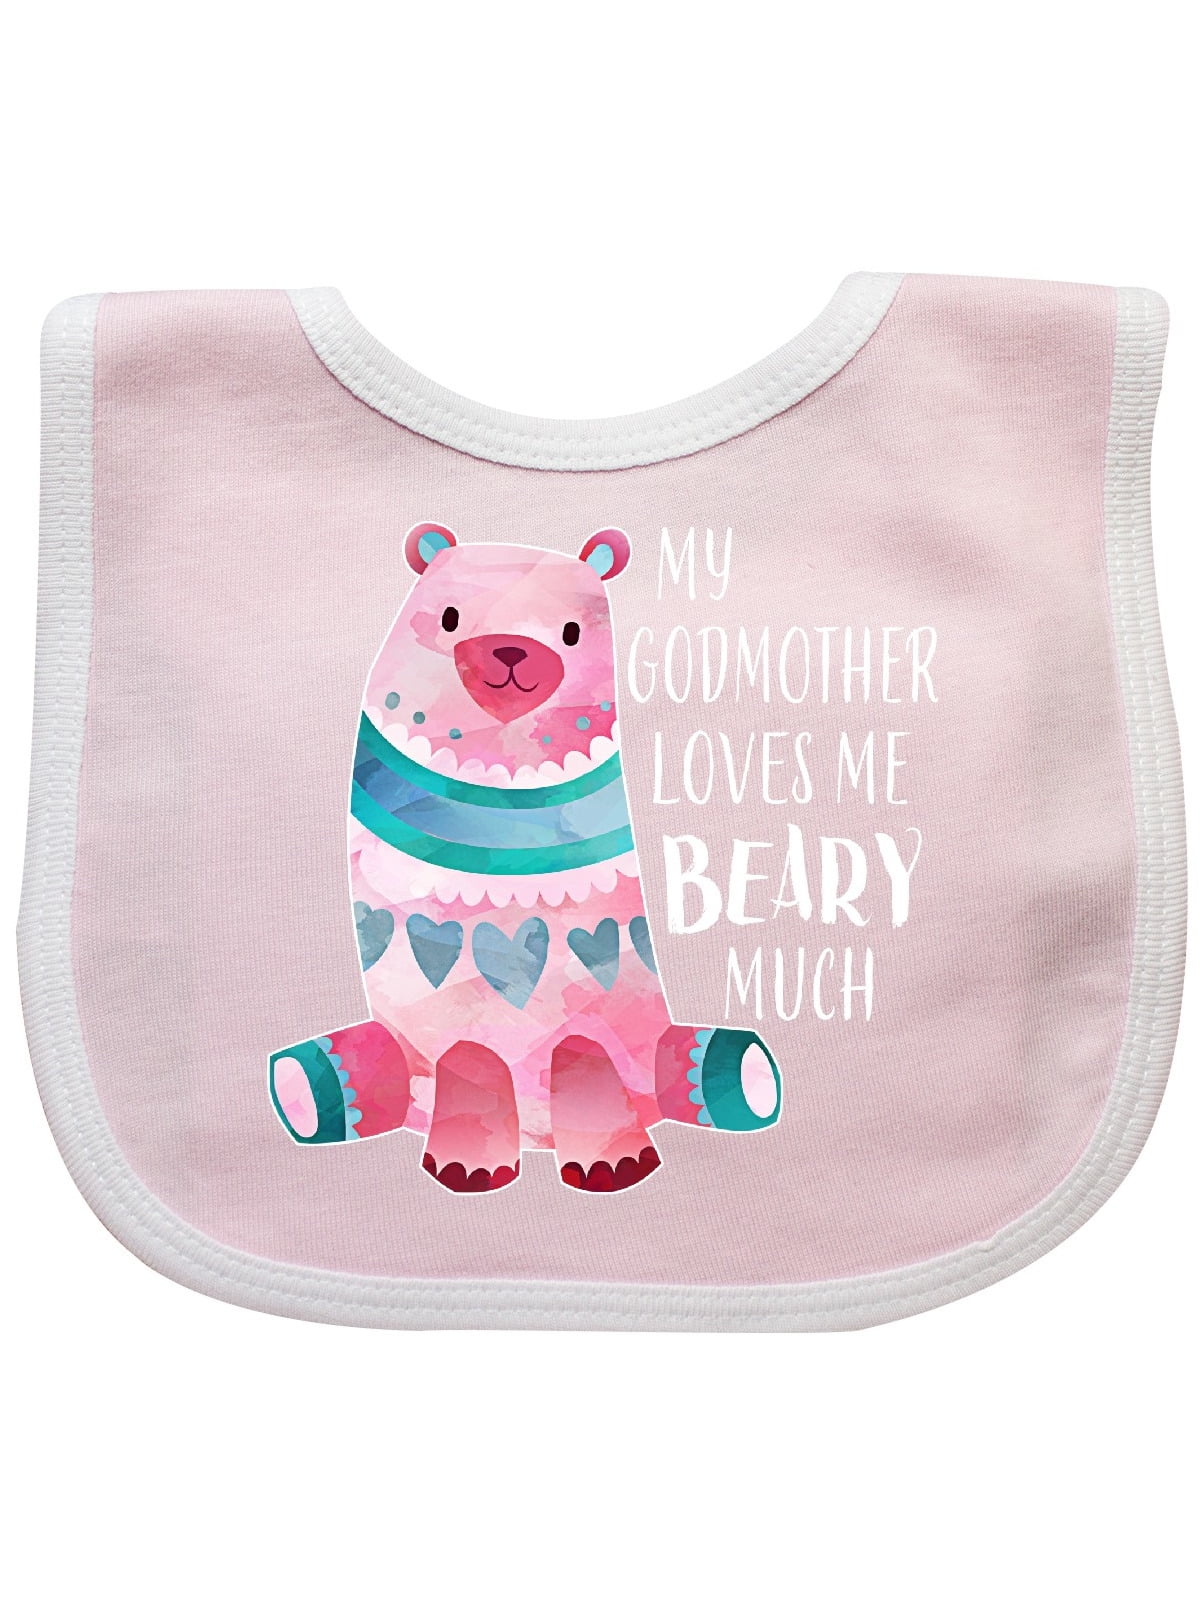 My Godmother Loves Me Beary Much with Cute Bear Baby Bib - Walmart.com ...